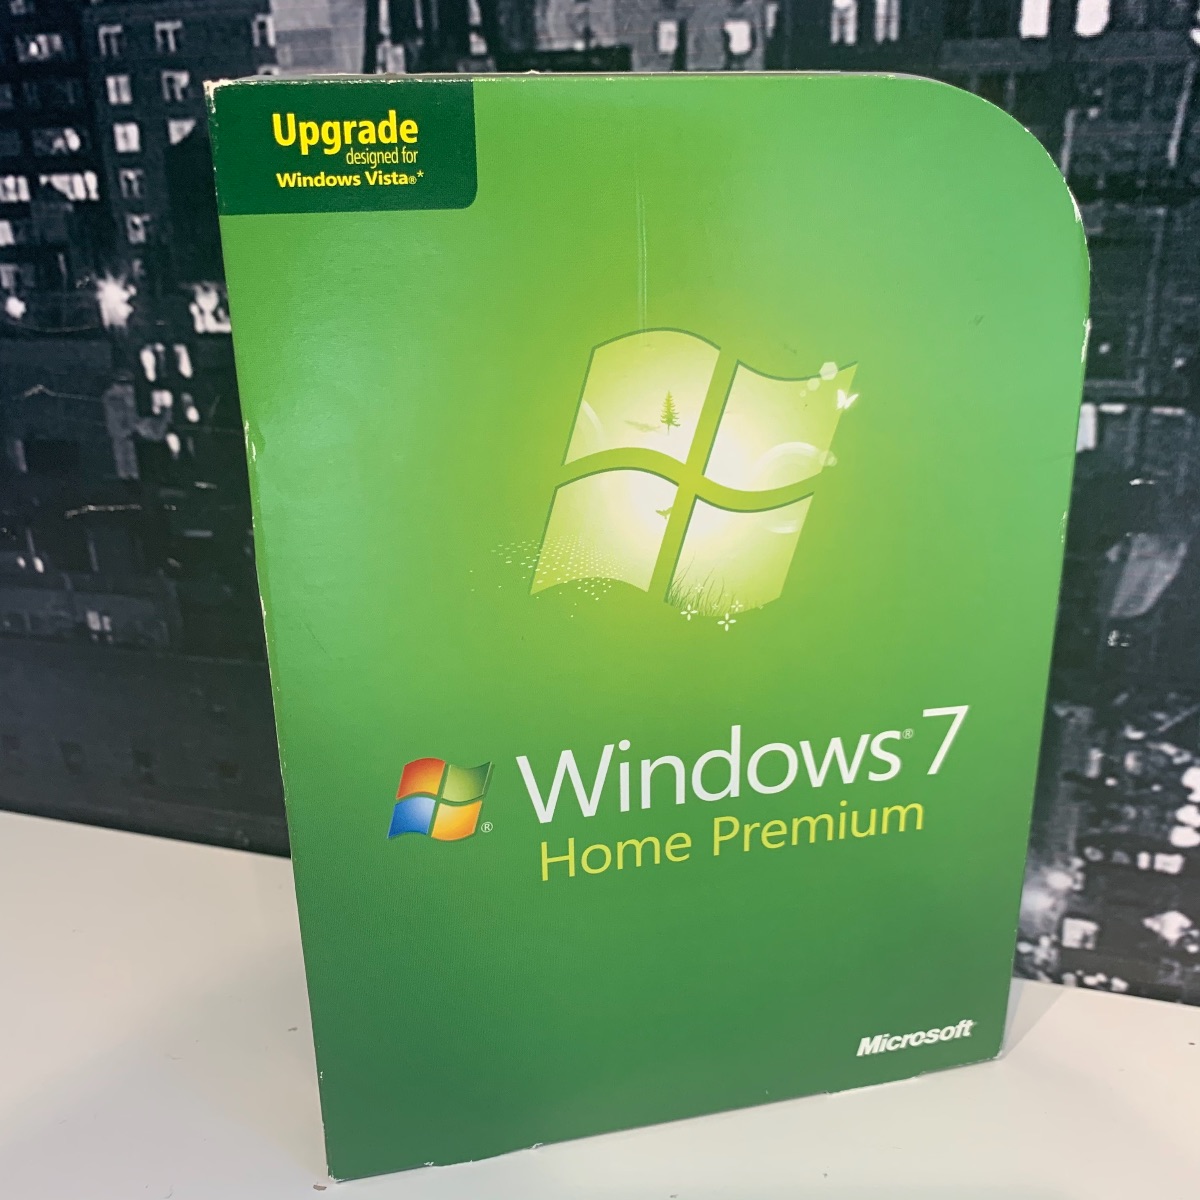 Windows 7 Home Premium Upgrade DVD 64-Bit Product License Key Original Boxed GFC-00026 882224883511 (Previously Used)